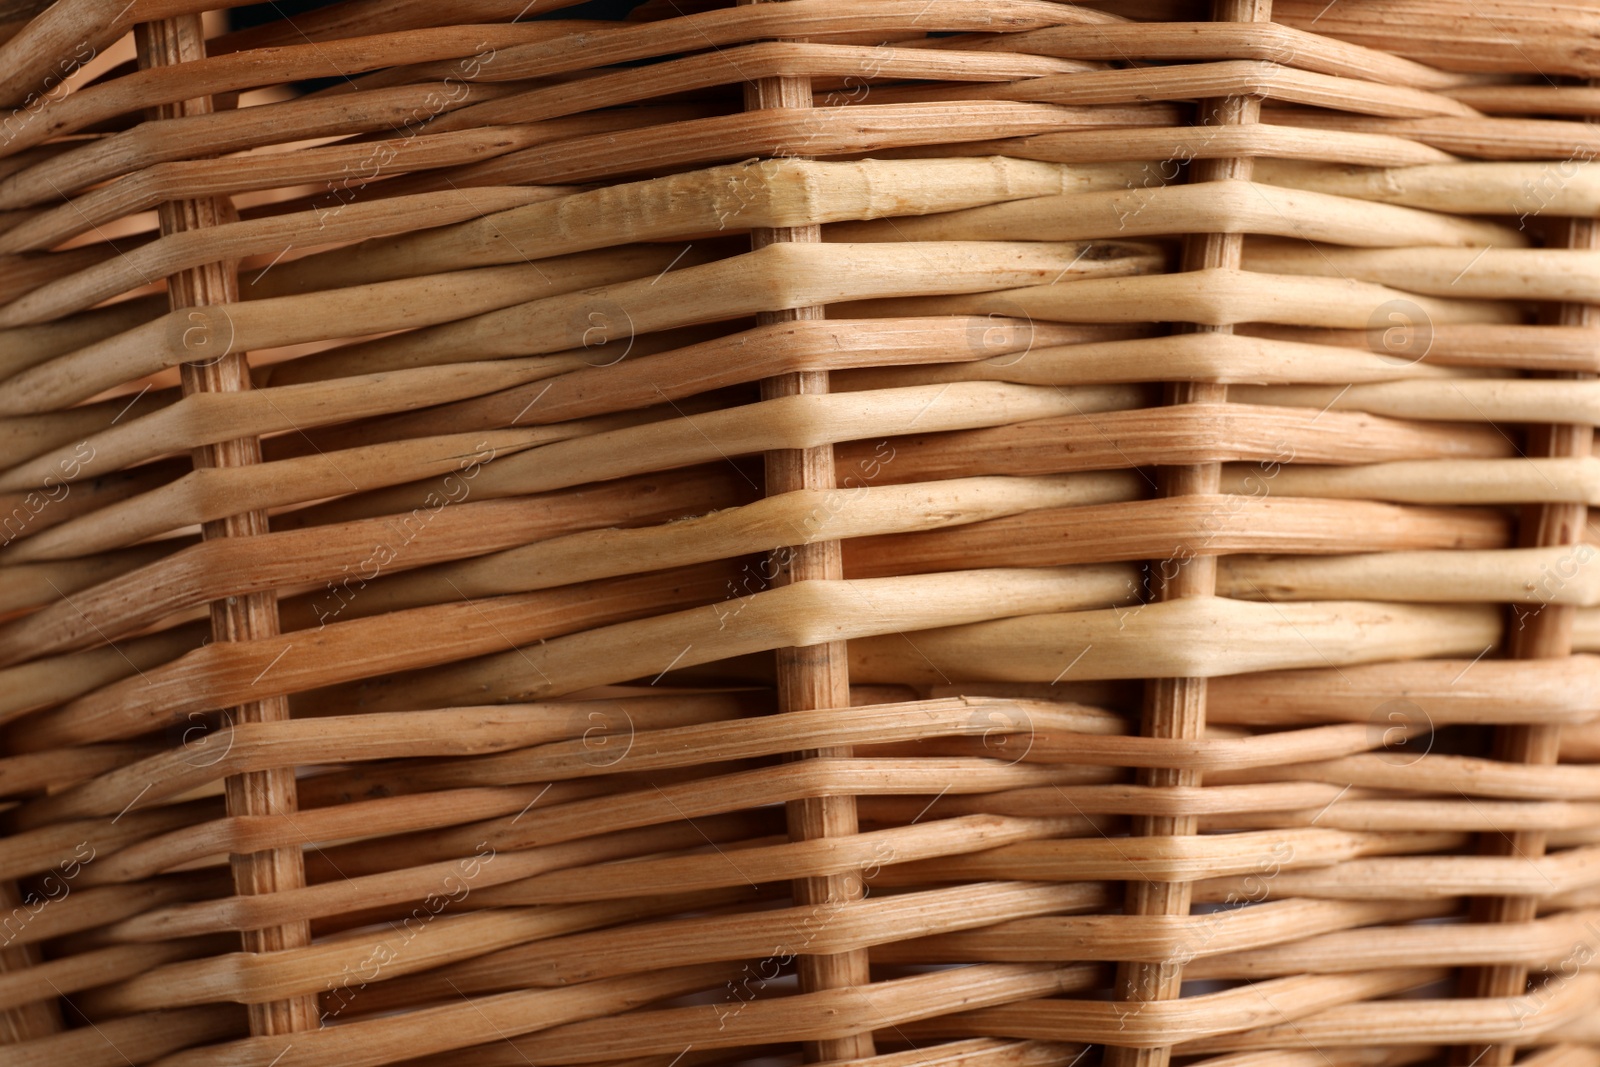 Photo of Handmade wicker basket made of natural material as background, closeup view